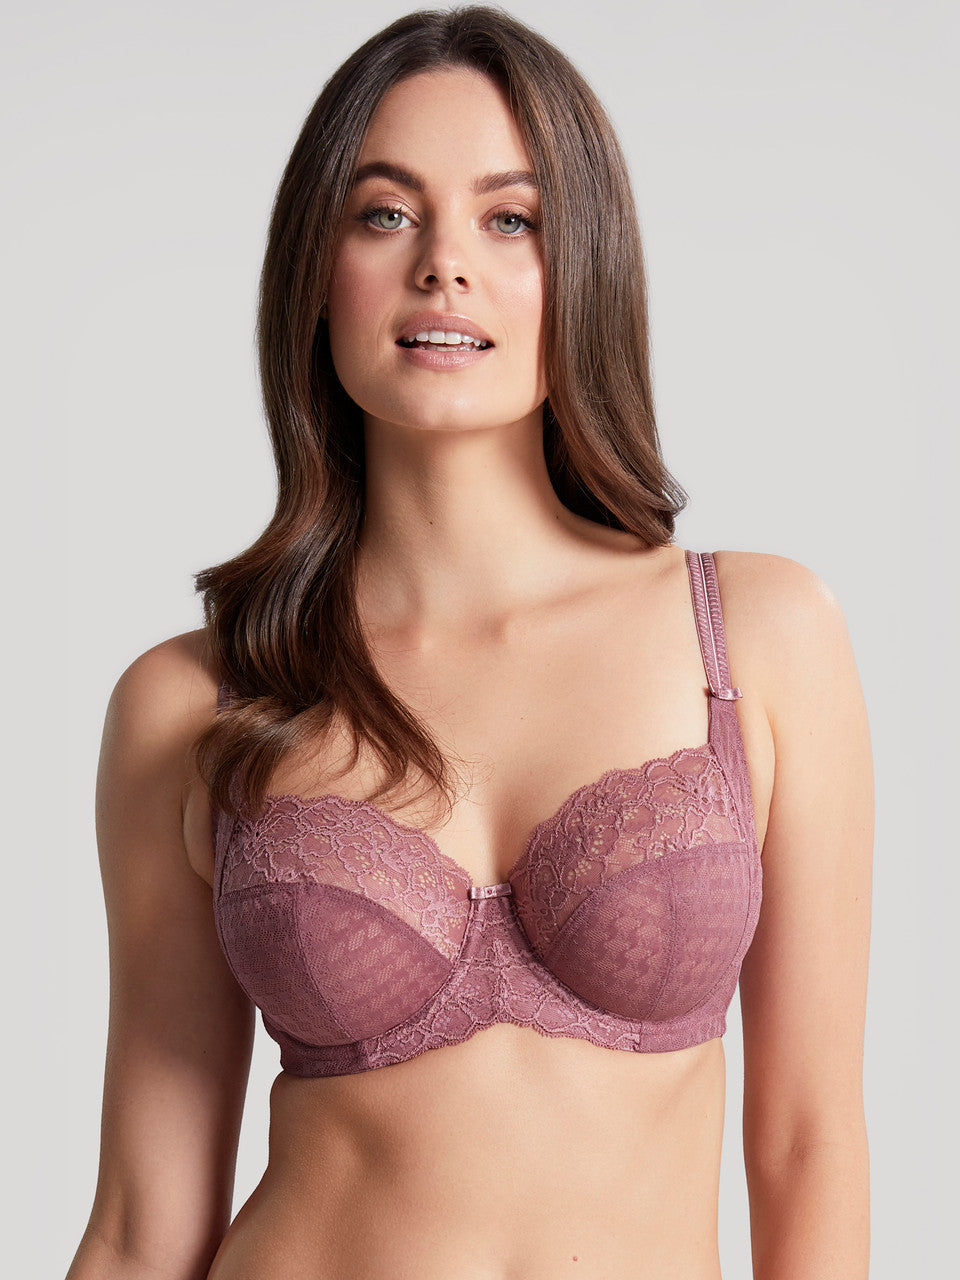 Envy Full Cup Bra - Rose Mauve, worn by model, front view